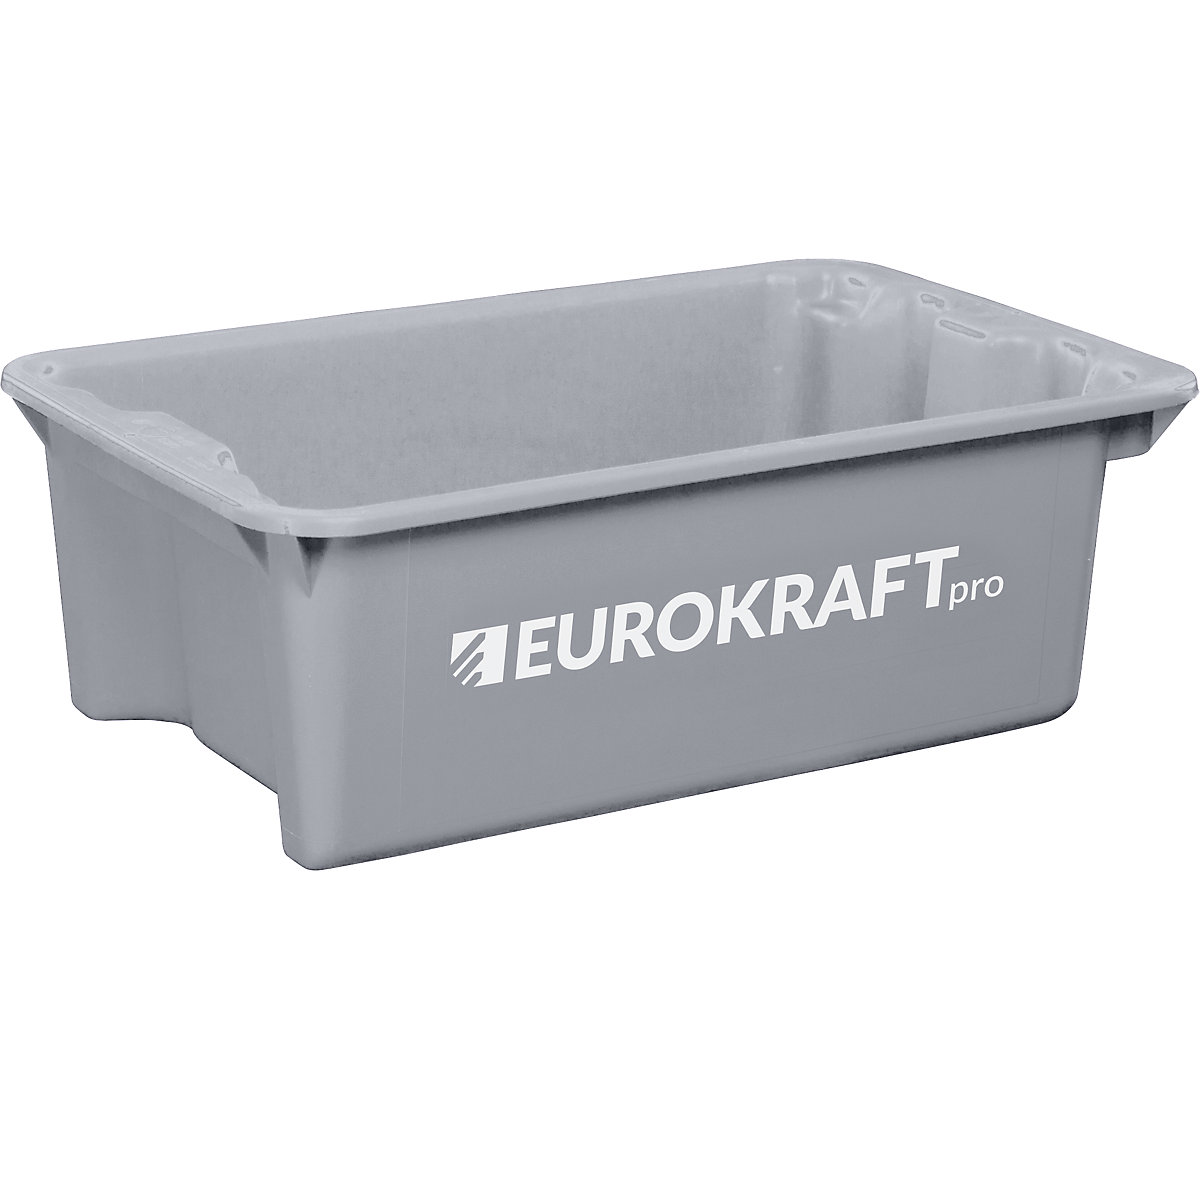 EUROKRAFTpro – Stack/nest container made of polypropylene suitable for foodstuffs, 34 l capacity, pack of 3, solid walls and base, grey